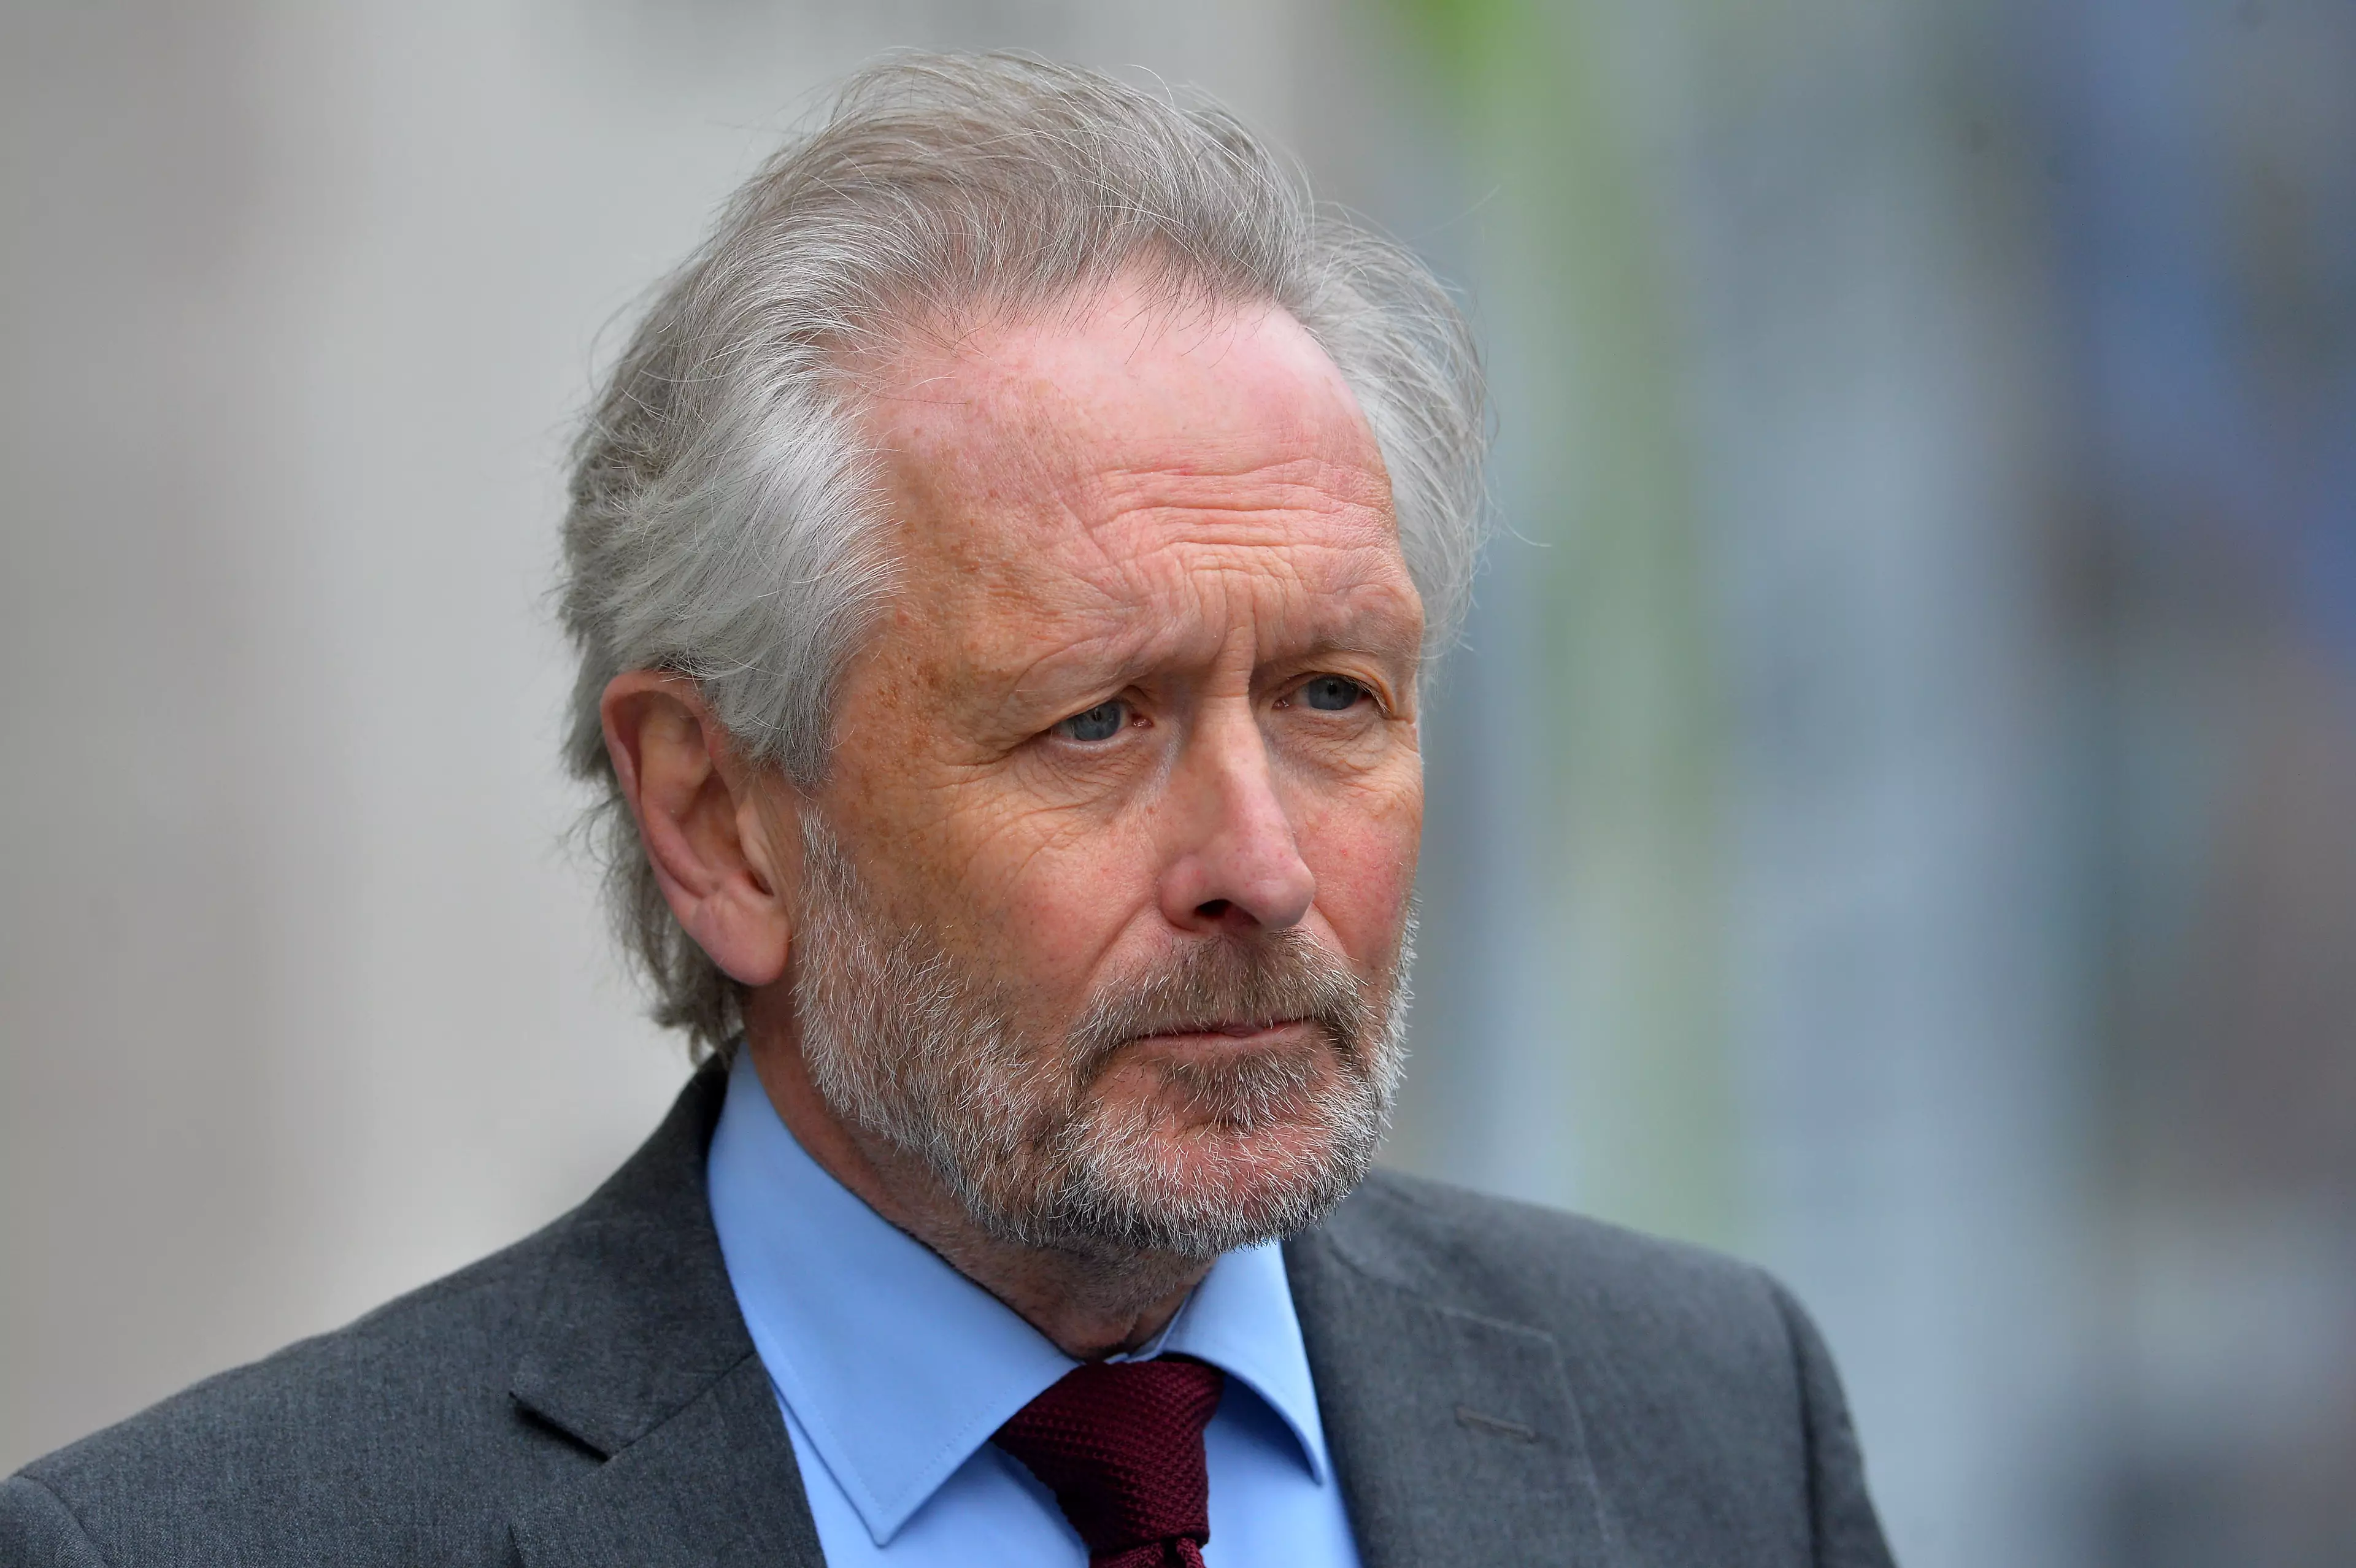 Leicester mayor Sir Peter Soulsby has spoken out against the decision.